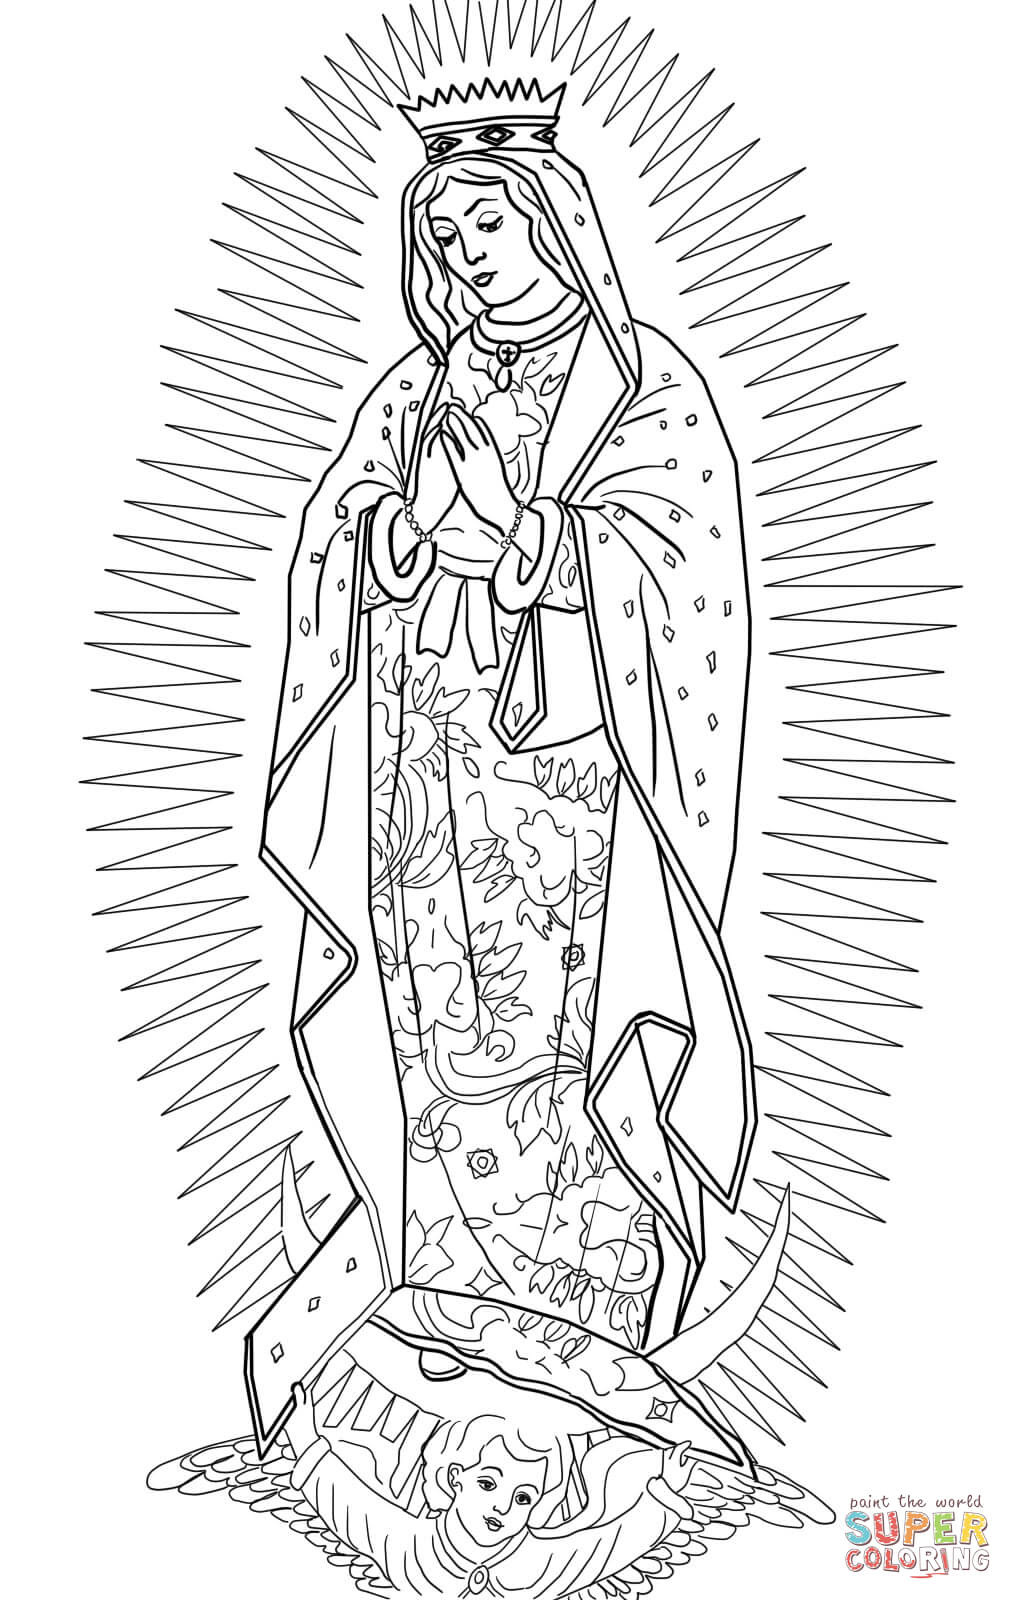 Our lady of guadalupe coloring page free printable coloring pages